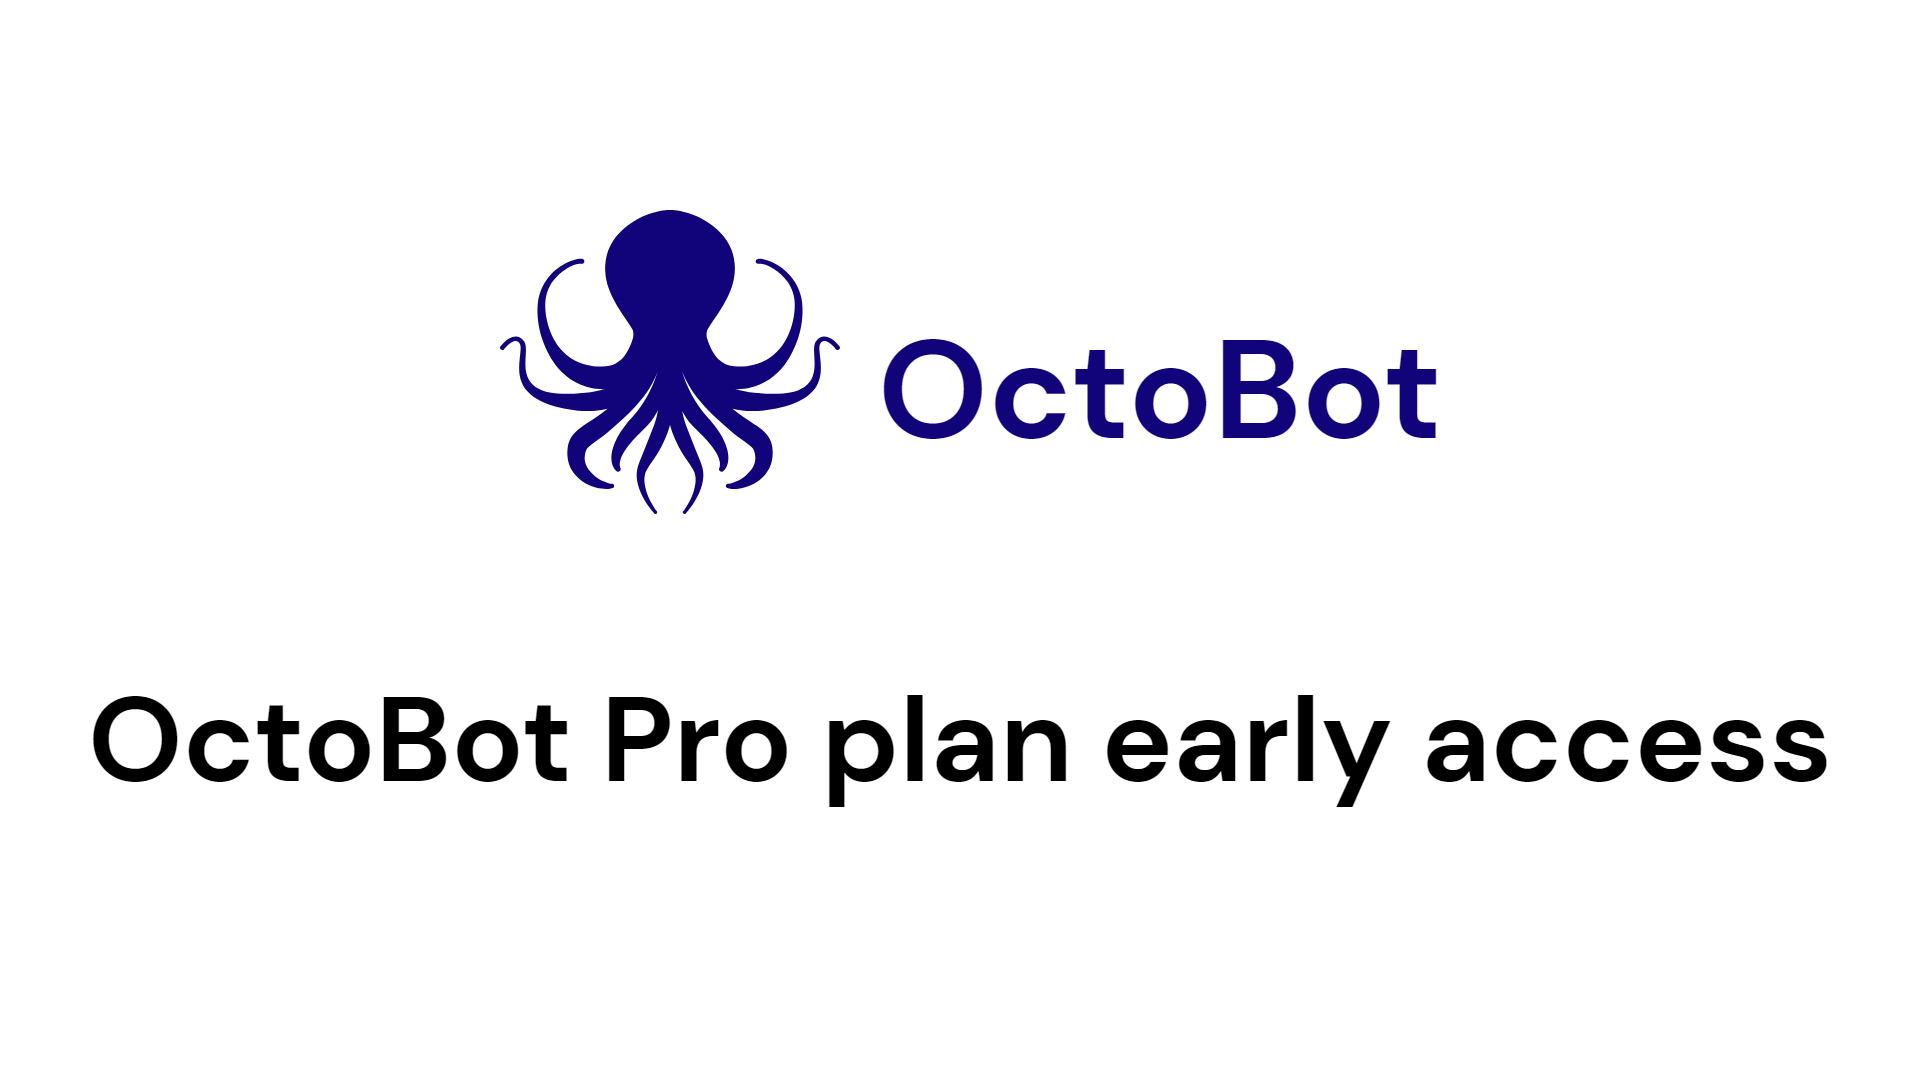 octobot cloud trading bots plan early access announcement